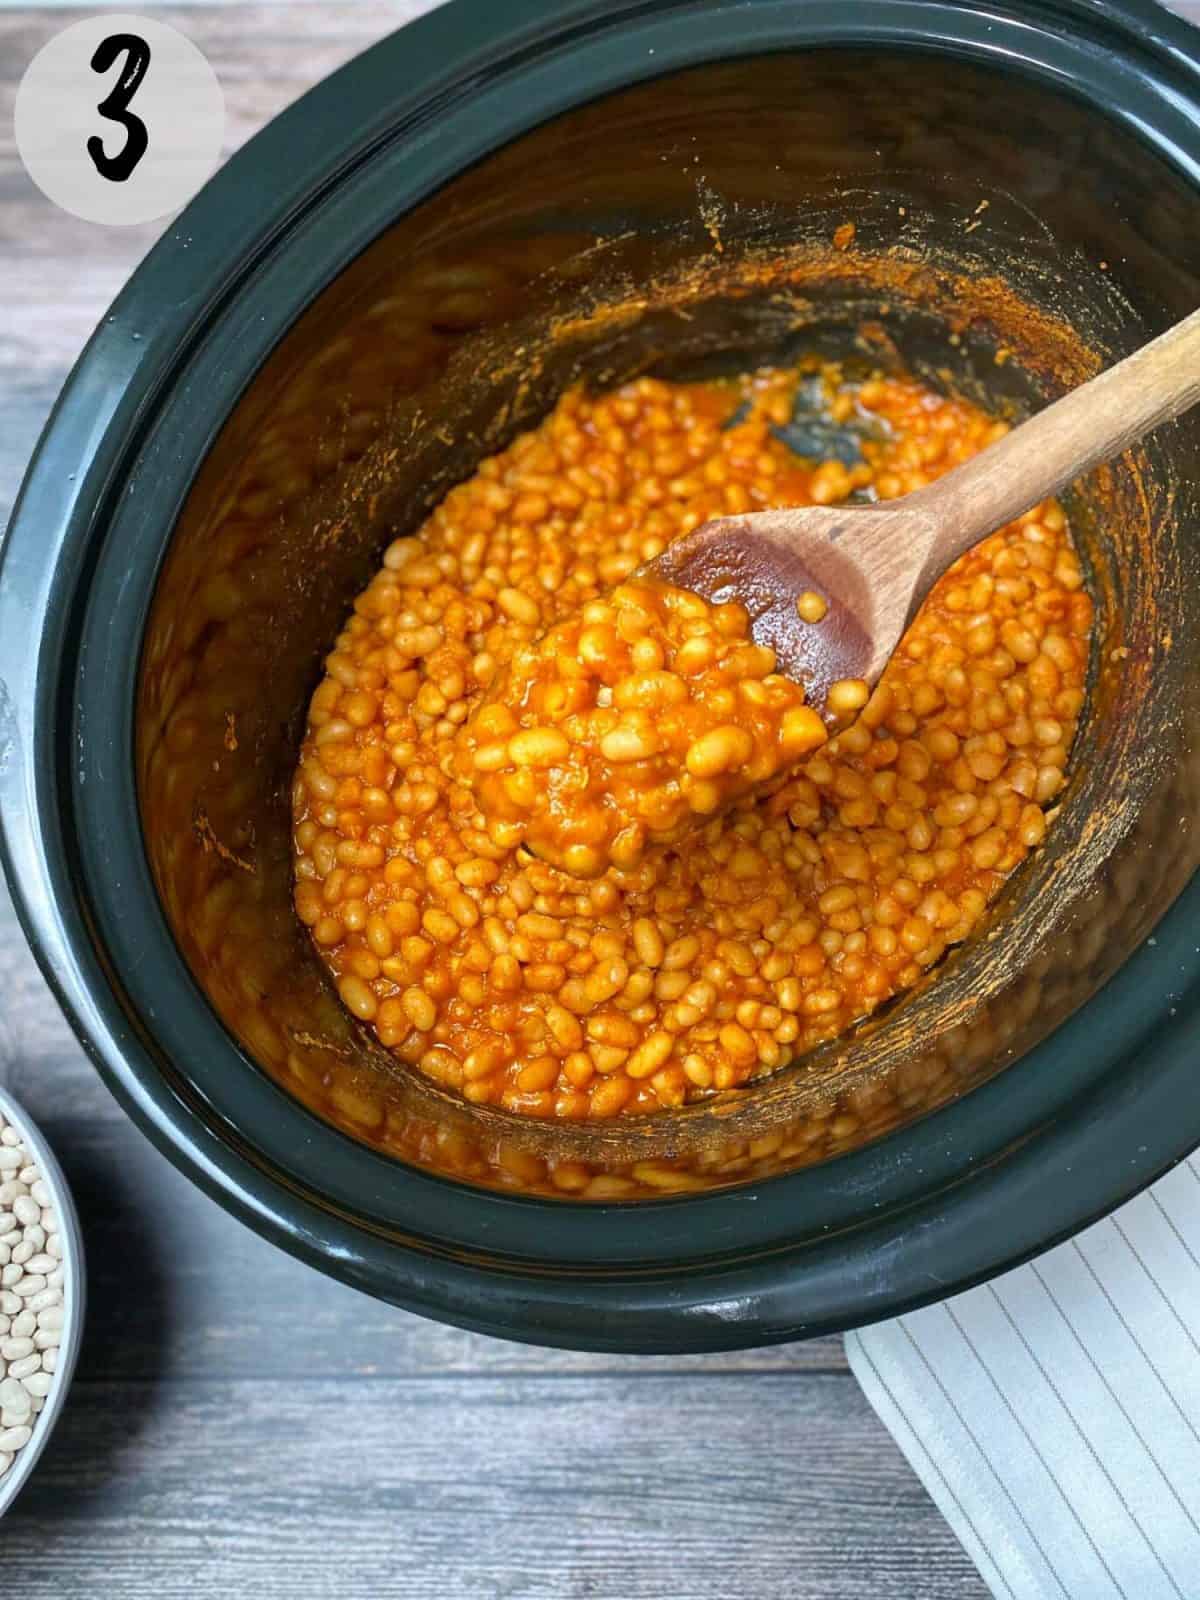 cooked baked beans in slow cooker with wooden spoon lifting up a bite